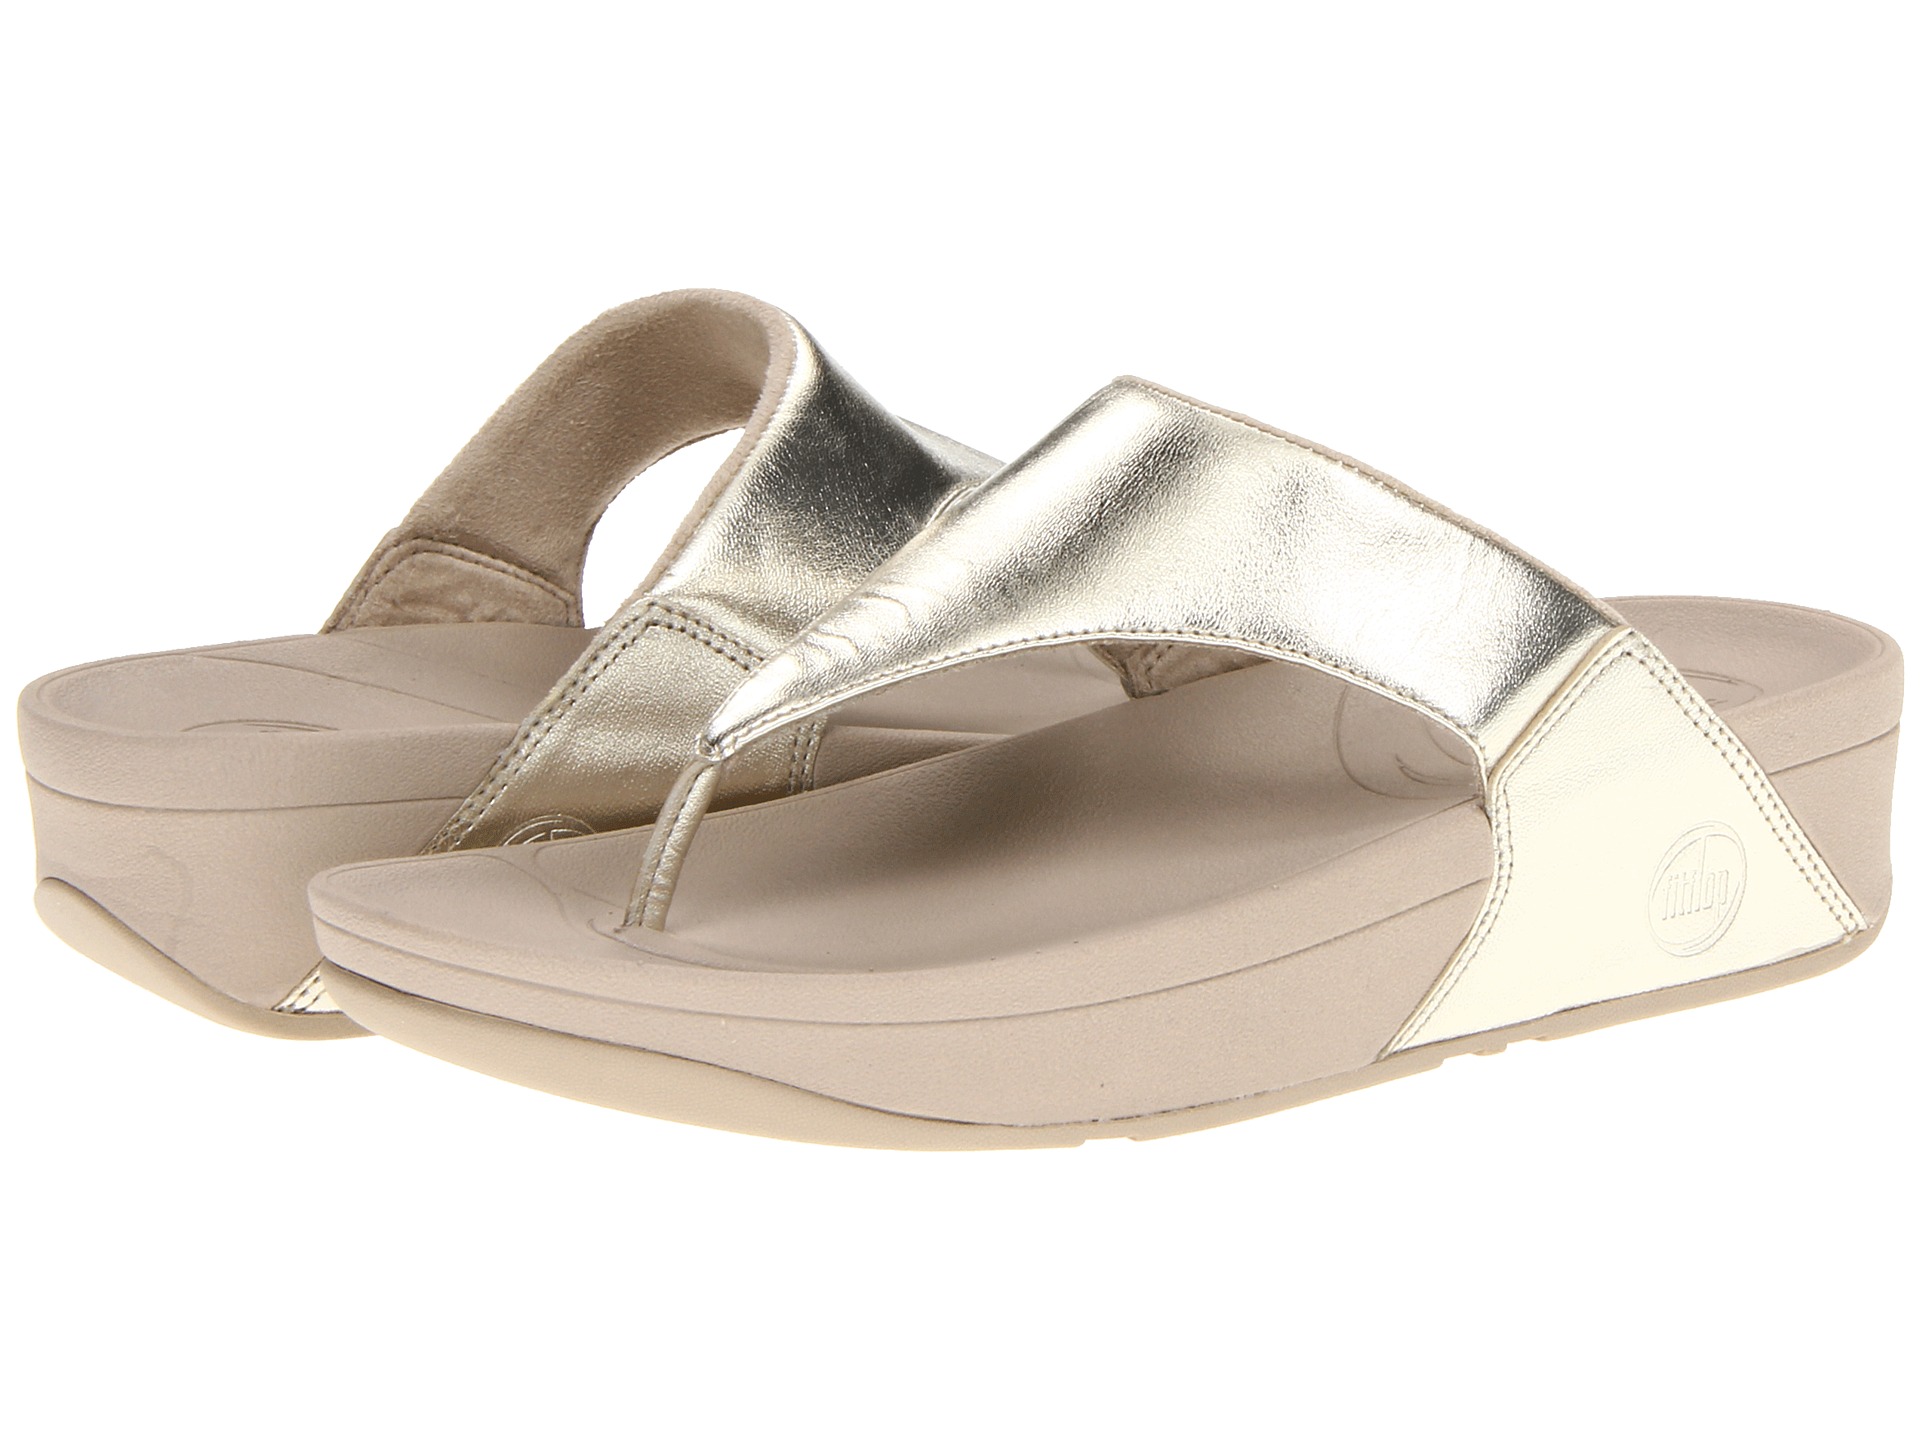 FitFlop Luluâ„¢ - Zappos Free Shipping BOTH Ways